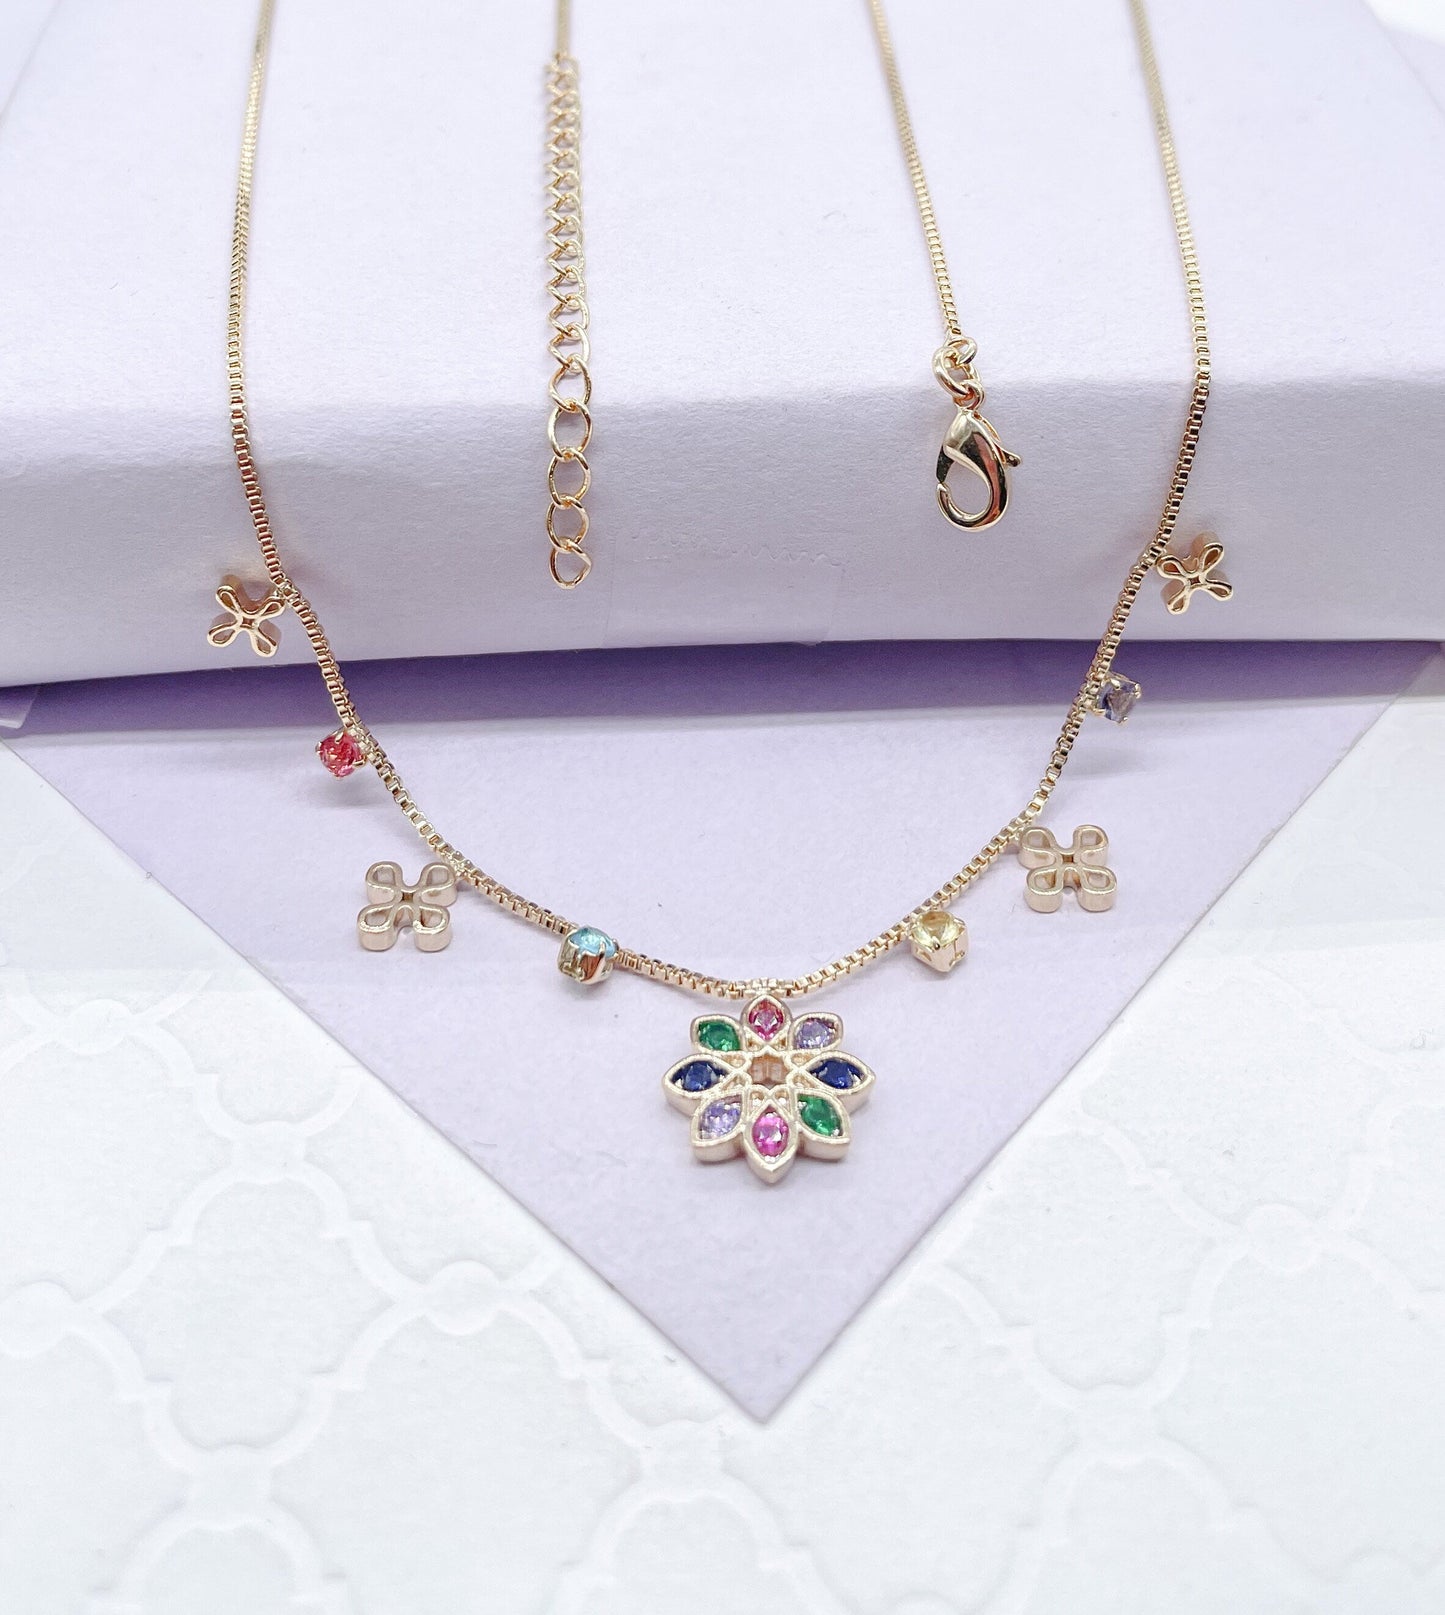 18k Gold Filled Dainty Box Chain Choker with Colorful Cz and Flower Charms w Flower Centerpiece